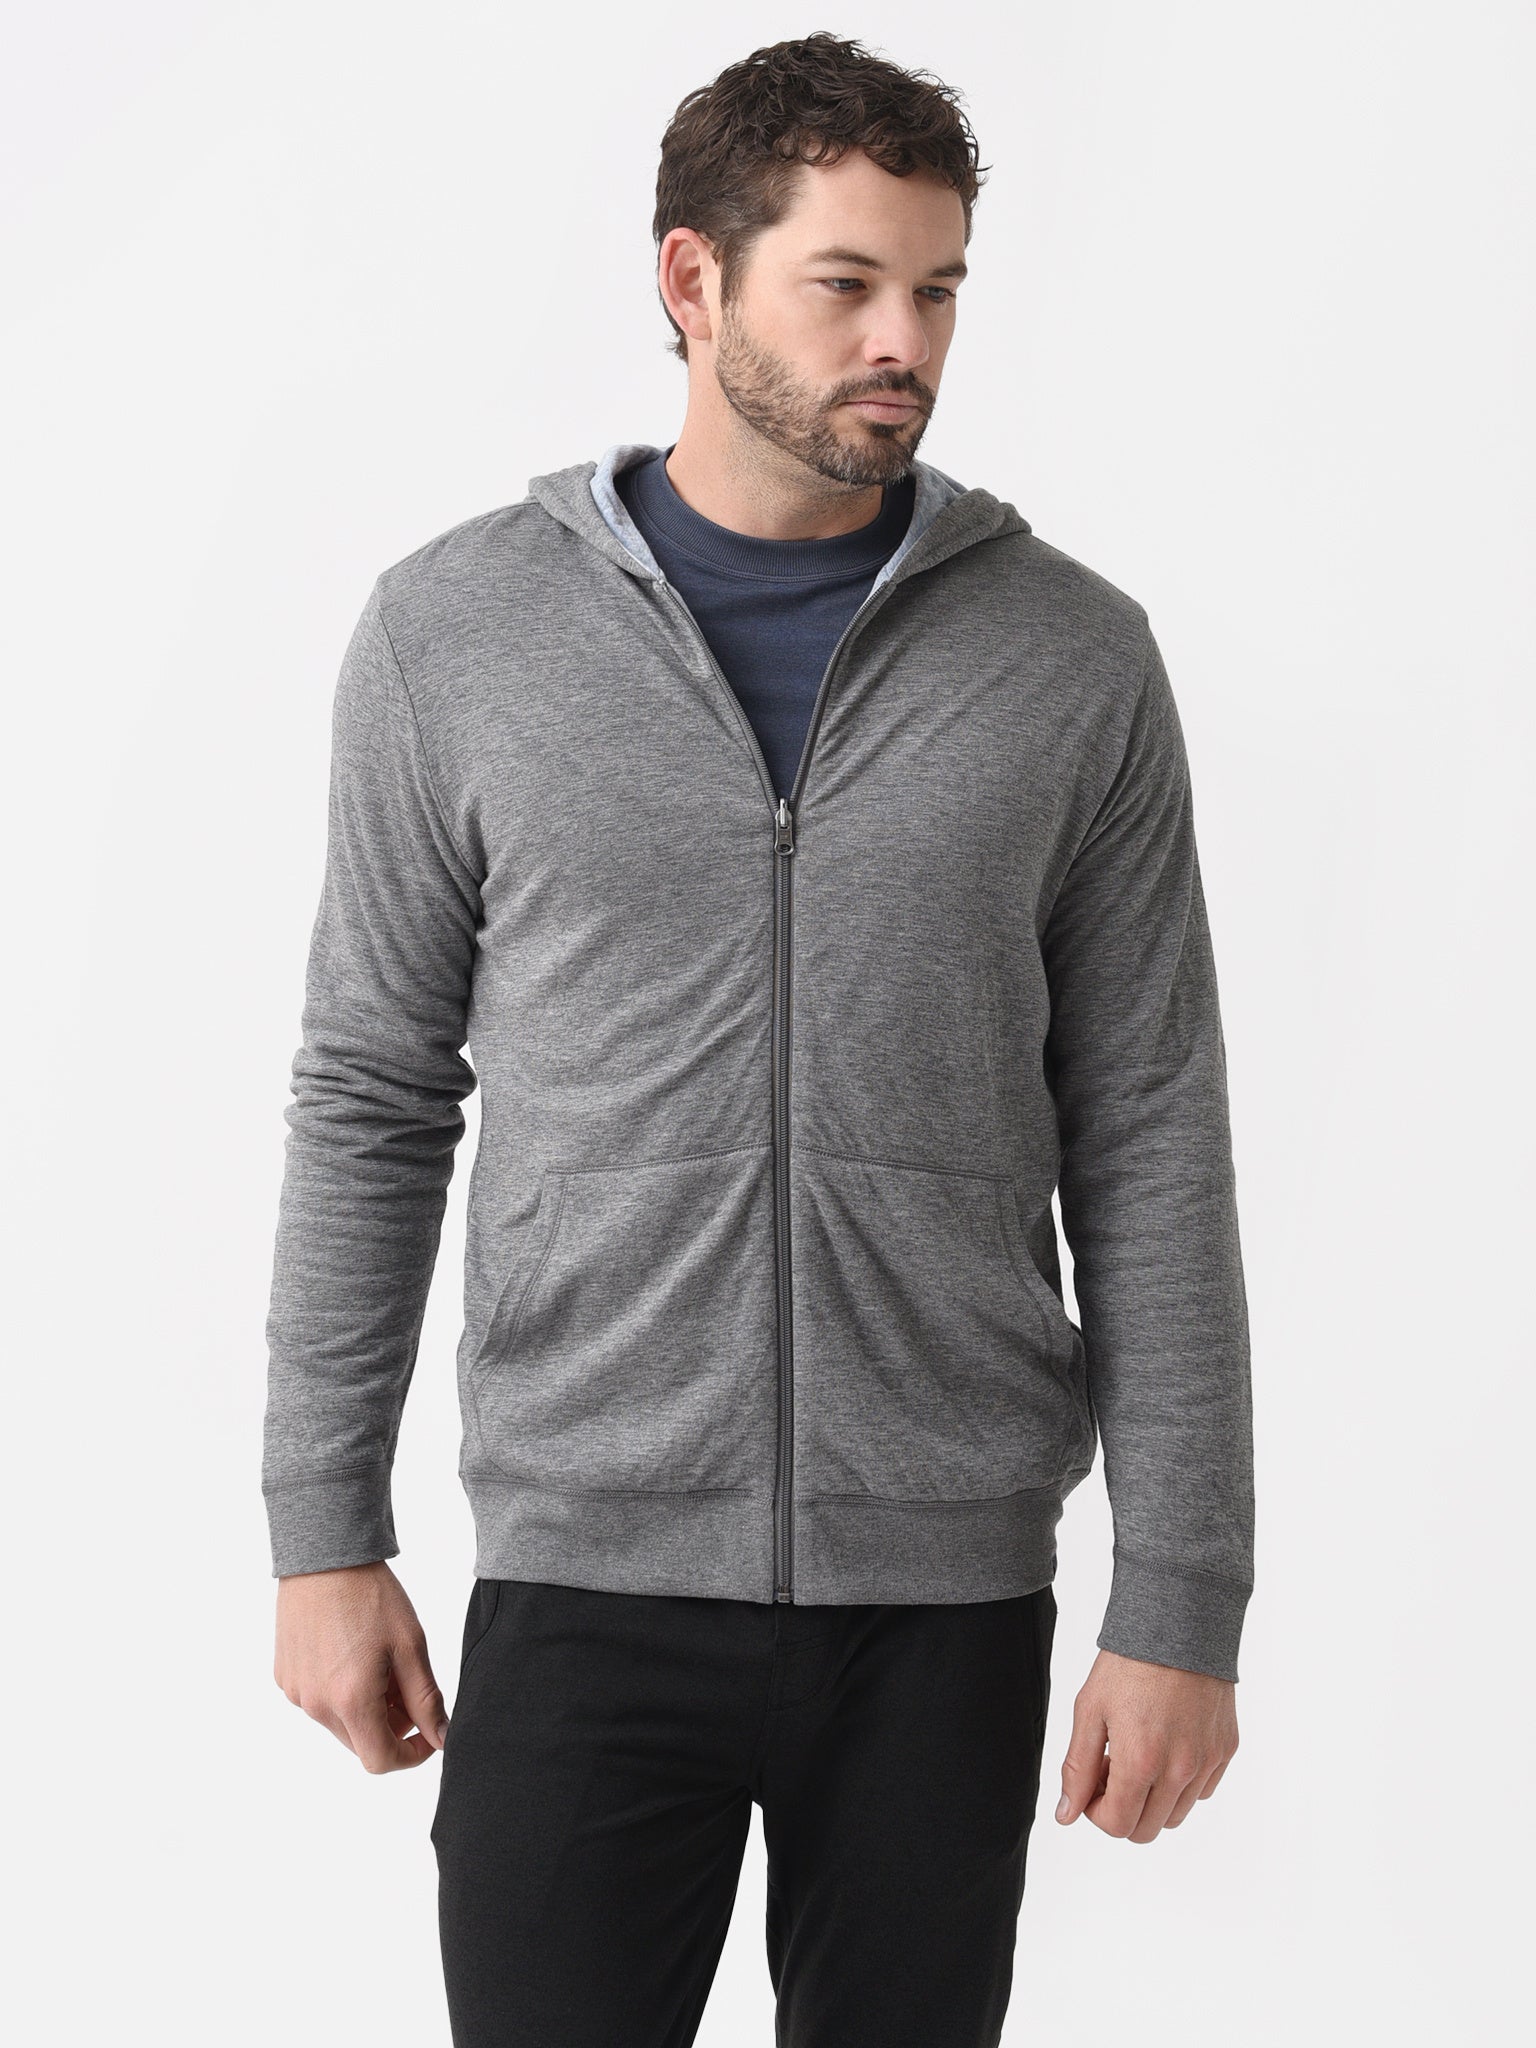 Reversible Double-Knit Zip-Up Sweater